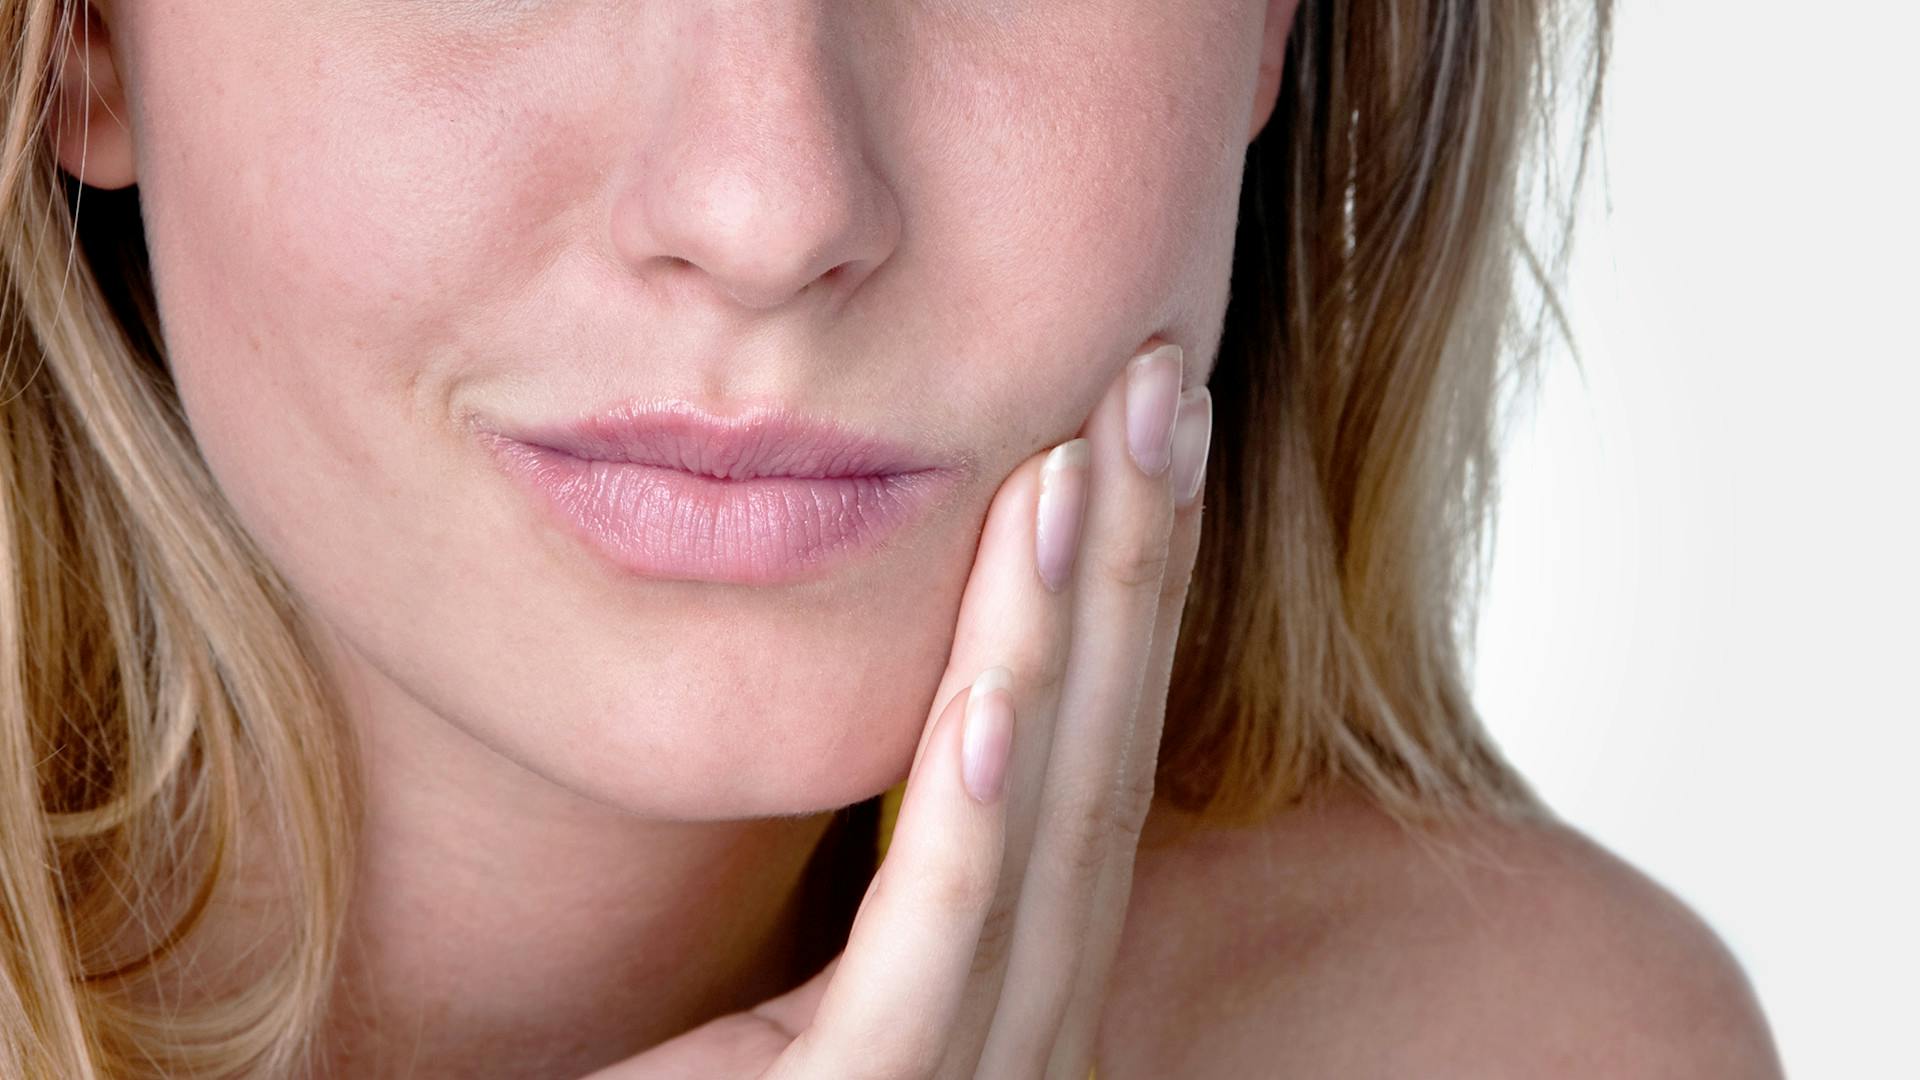 woman with mouth ulcer touching painful mouth and cheek